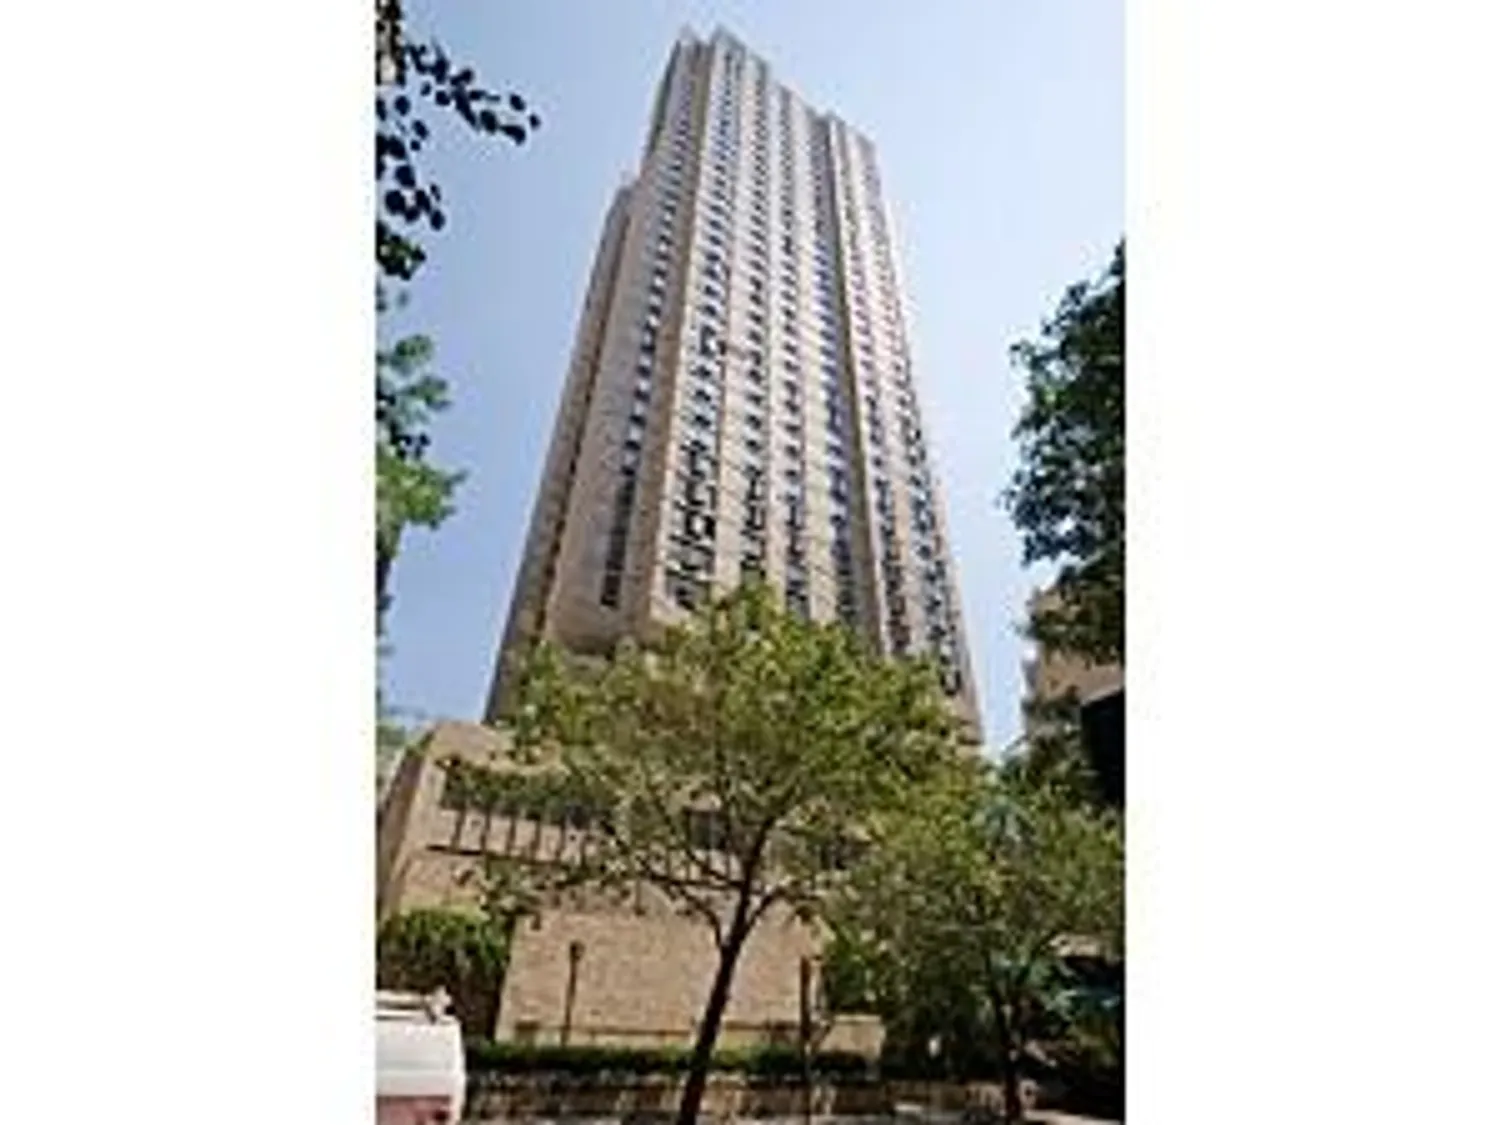 39 Story Cooperative located Park & Lexington Aves